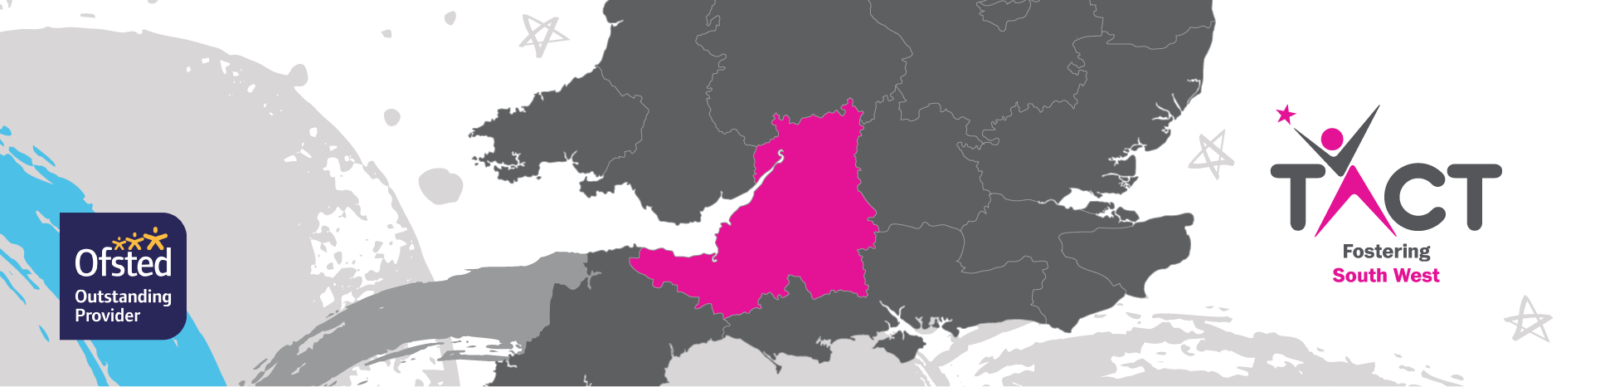 Fostering South West